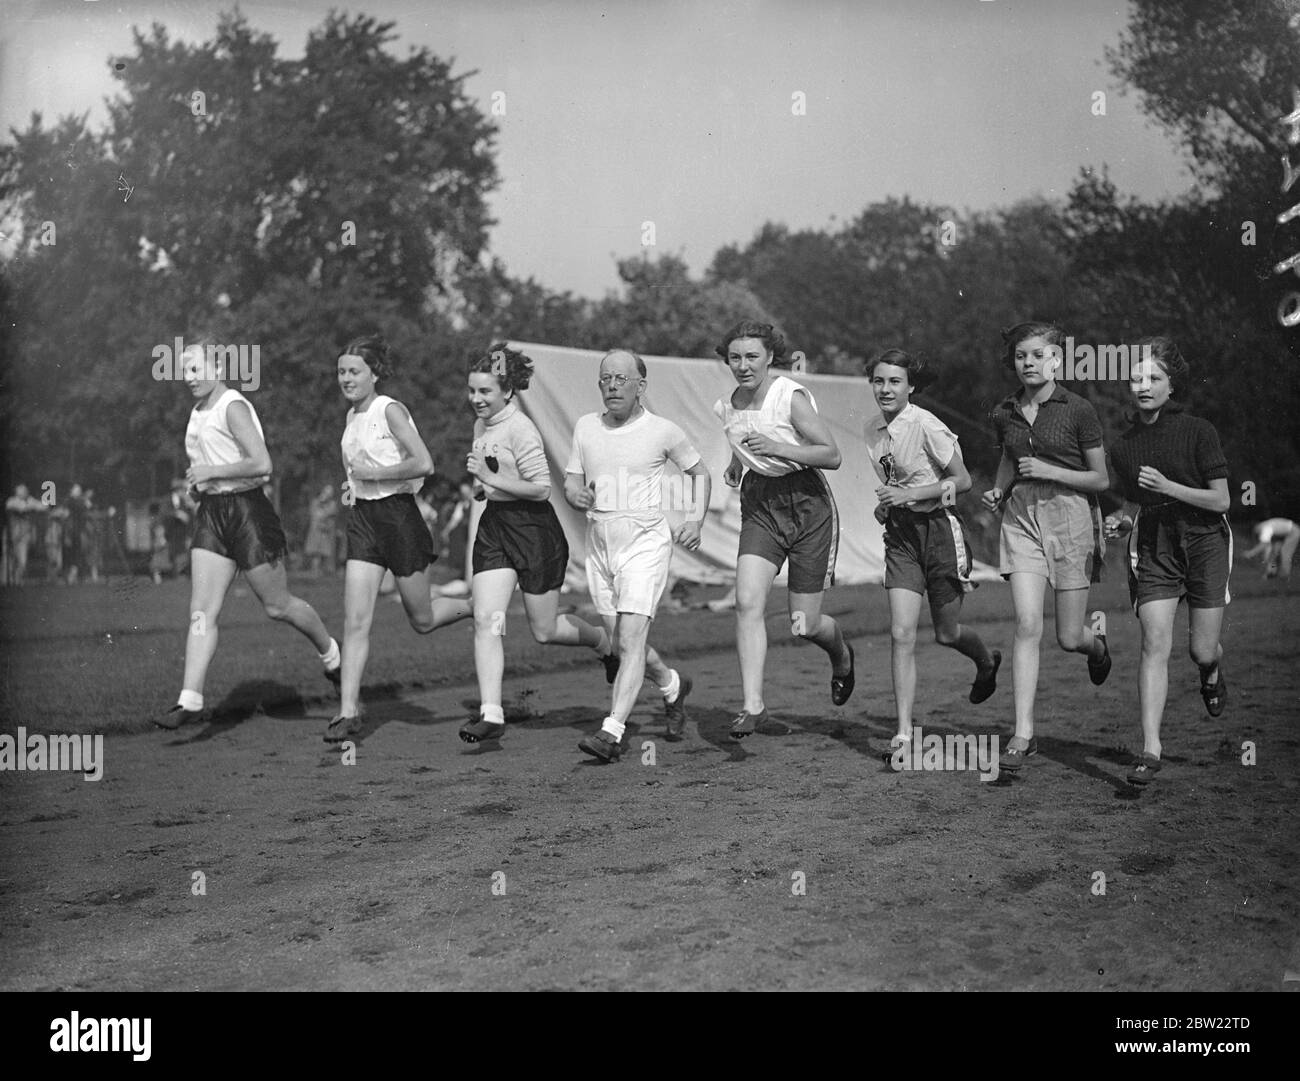 Age trains youth in Battersea Park. Veteran member of the Belgrave Harriers, 57-year-old Mr W Fish is training girls of the Spartan ladies Athletic Club in Battersea Park, London. Photo shows, Mr W Fish with goals of the Spartan ladies club in a training run at Battersea Park, London, today (Sunday). 26 September 1937 Stock Photo